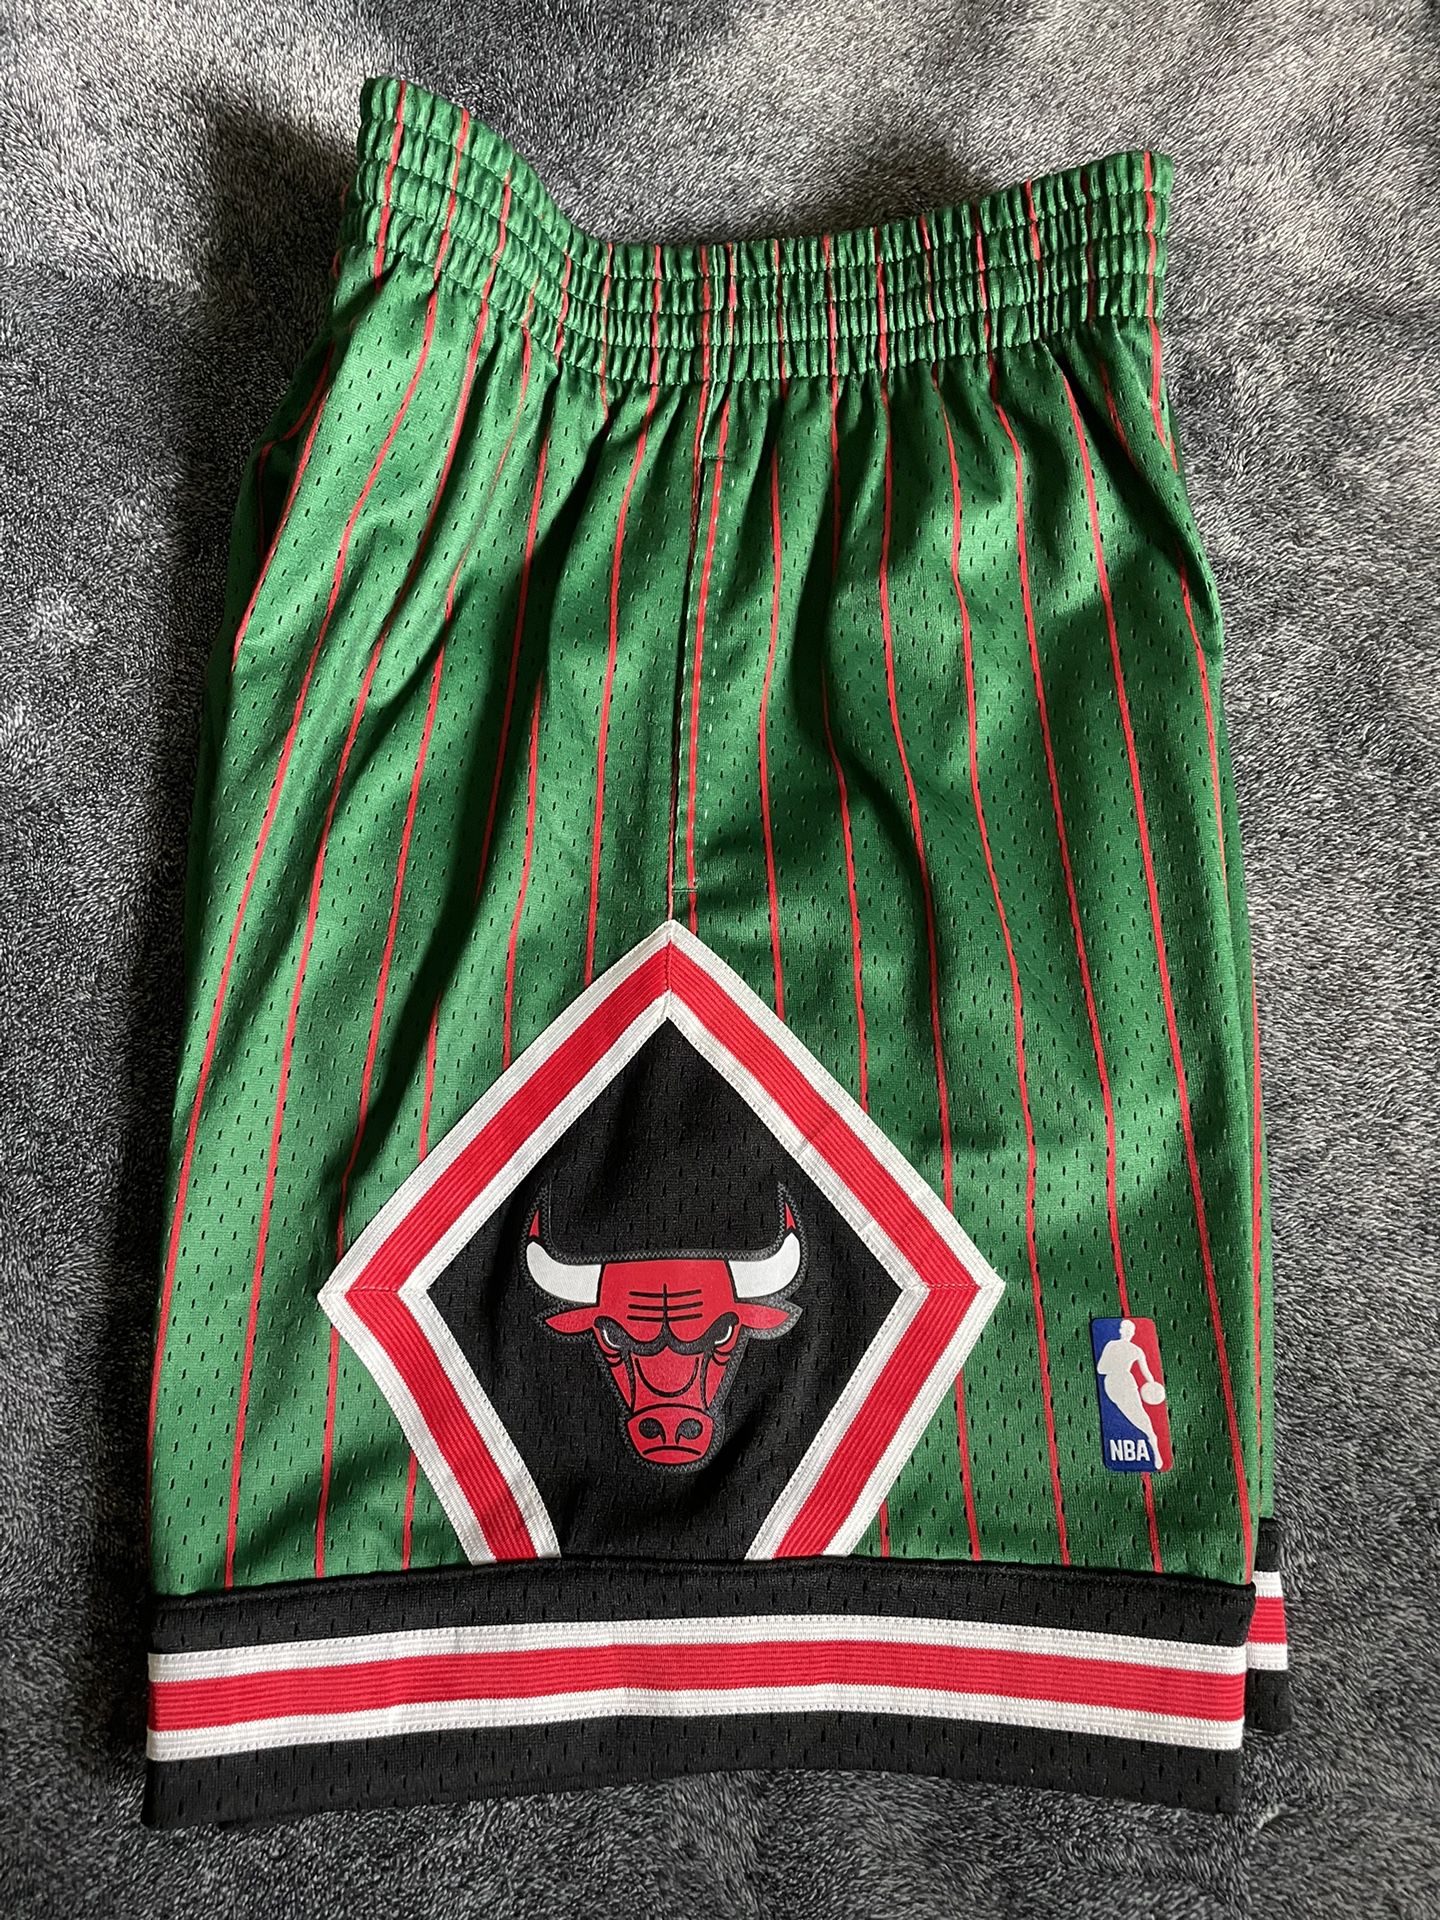 Mitchell & Ness Black/Red NBA Chicago Bulls 2.0 Sublimated Shorts S-L for  Sale in San Diego, CA - OfferUp